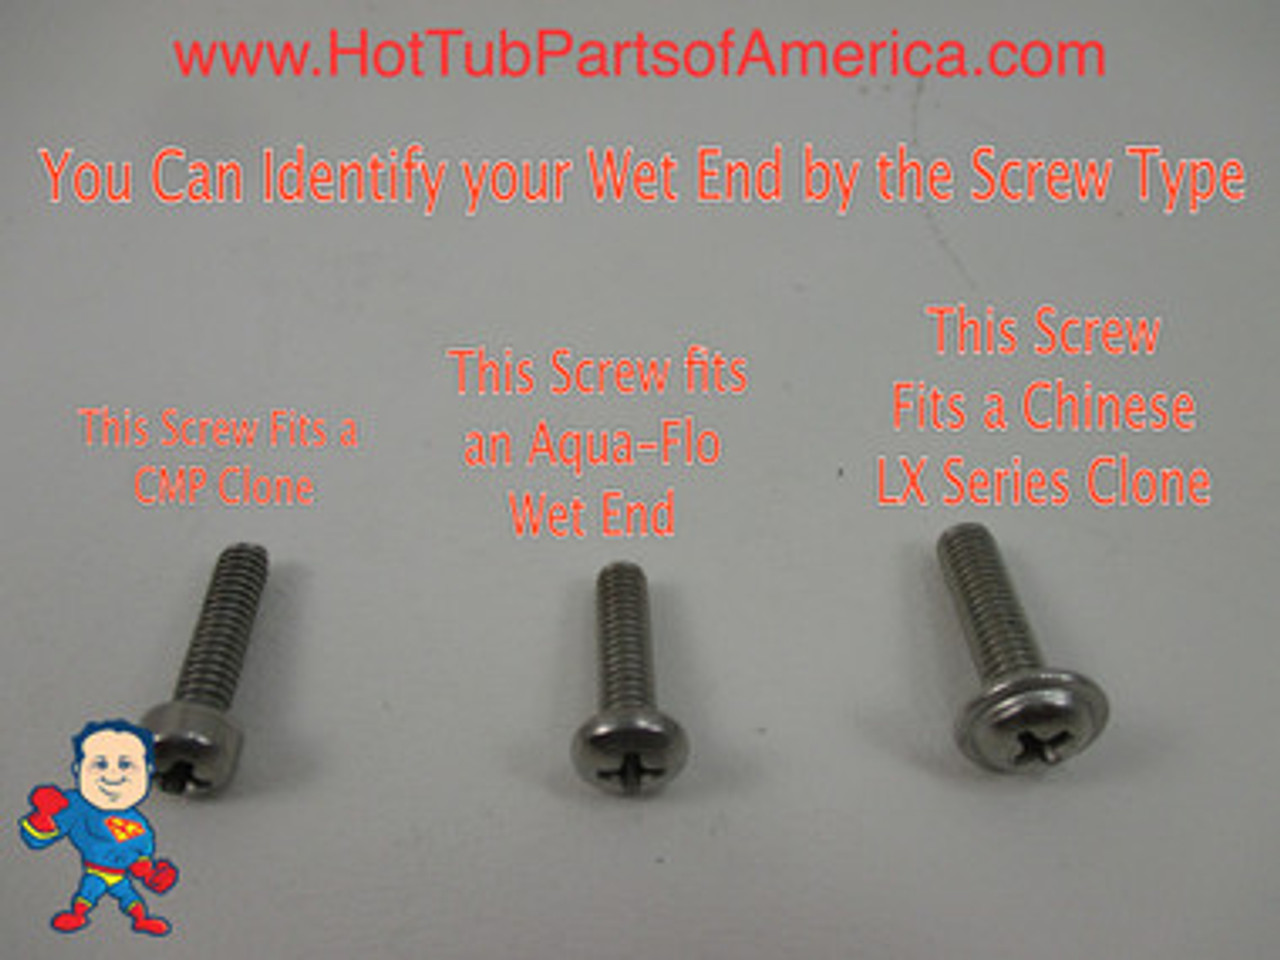 Here are the 3 different screws to help you identify which wet end you have.